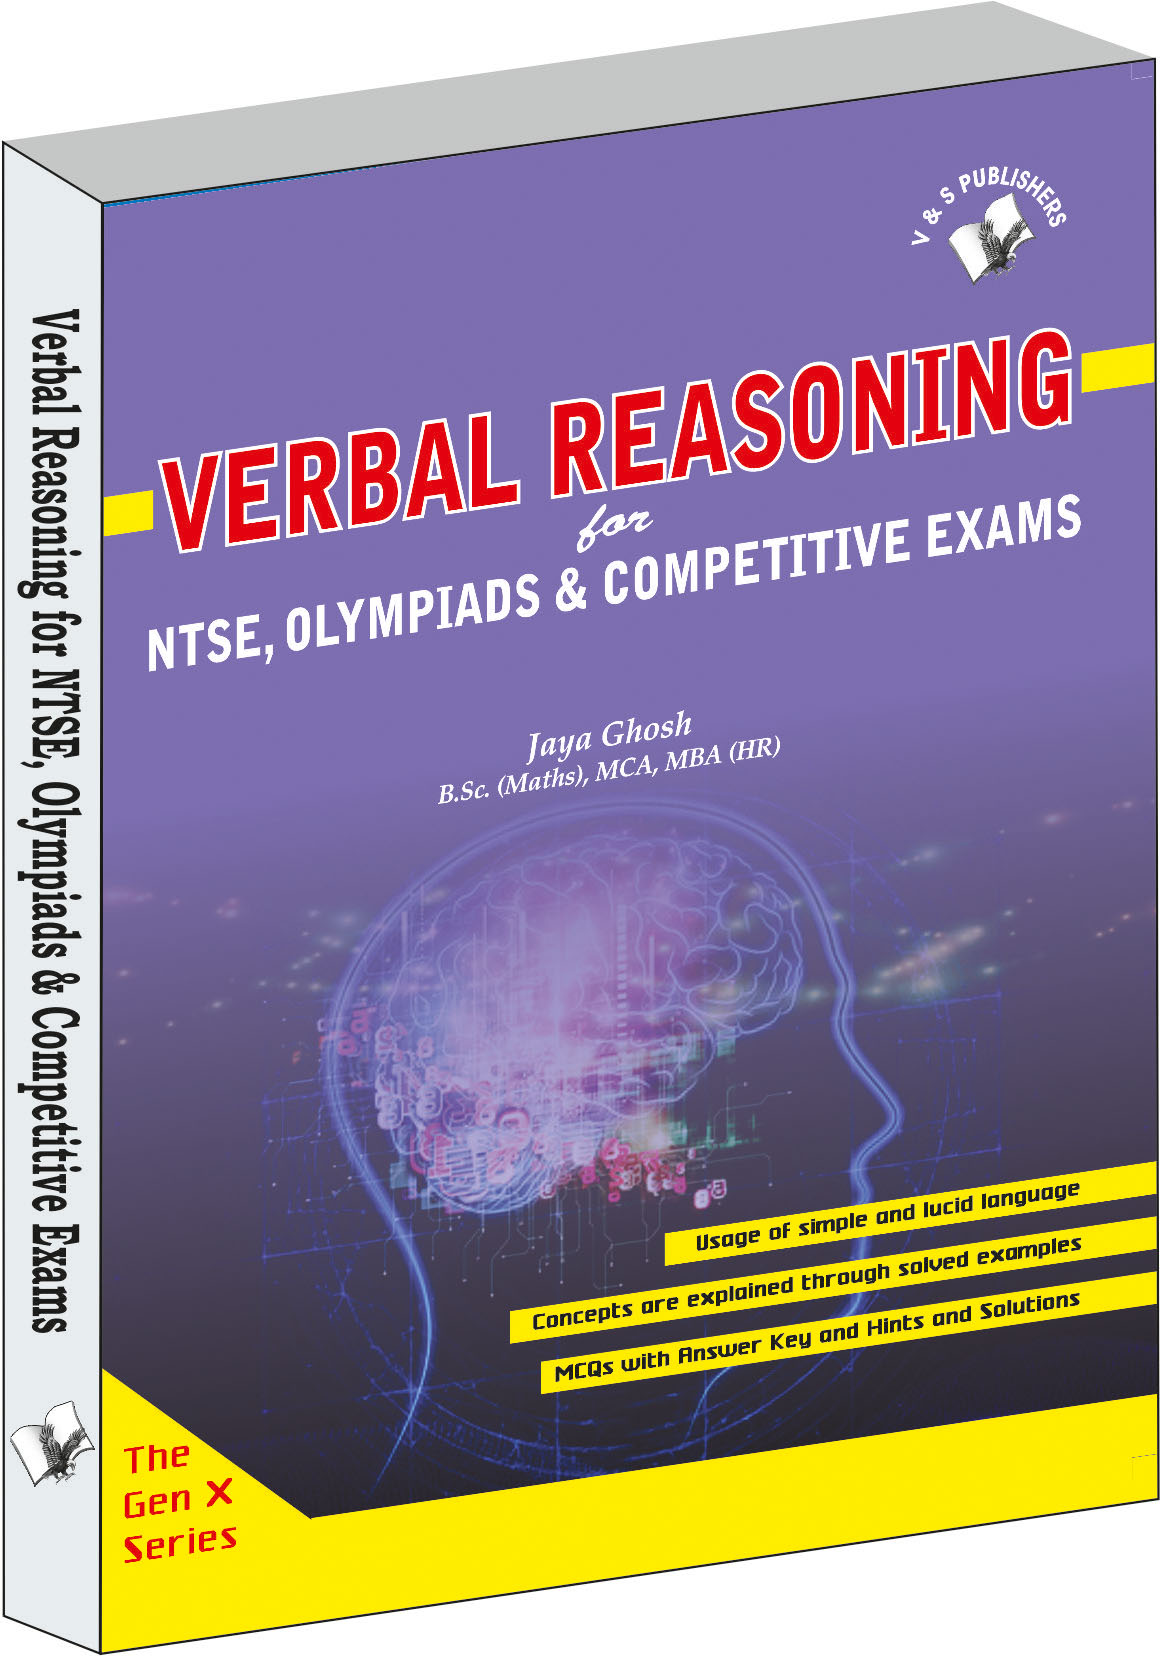 Verbal Reasoning-For NTSE, olympiads & competitive exams